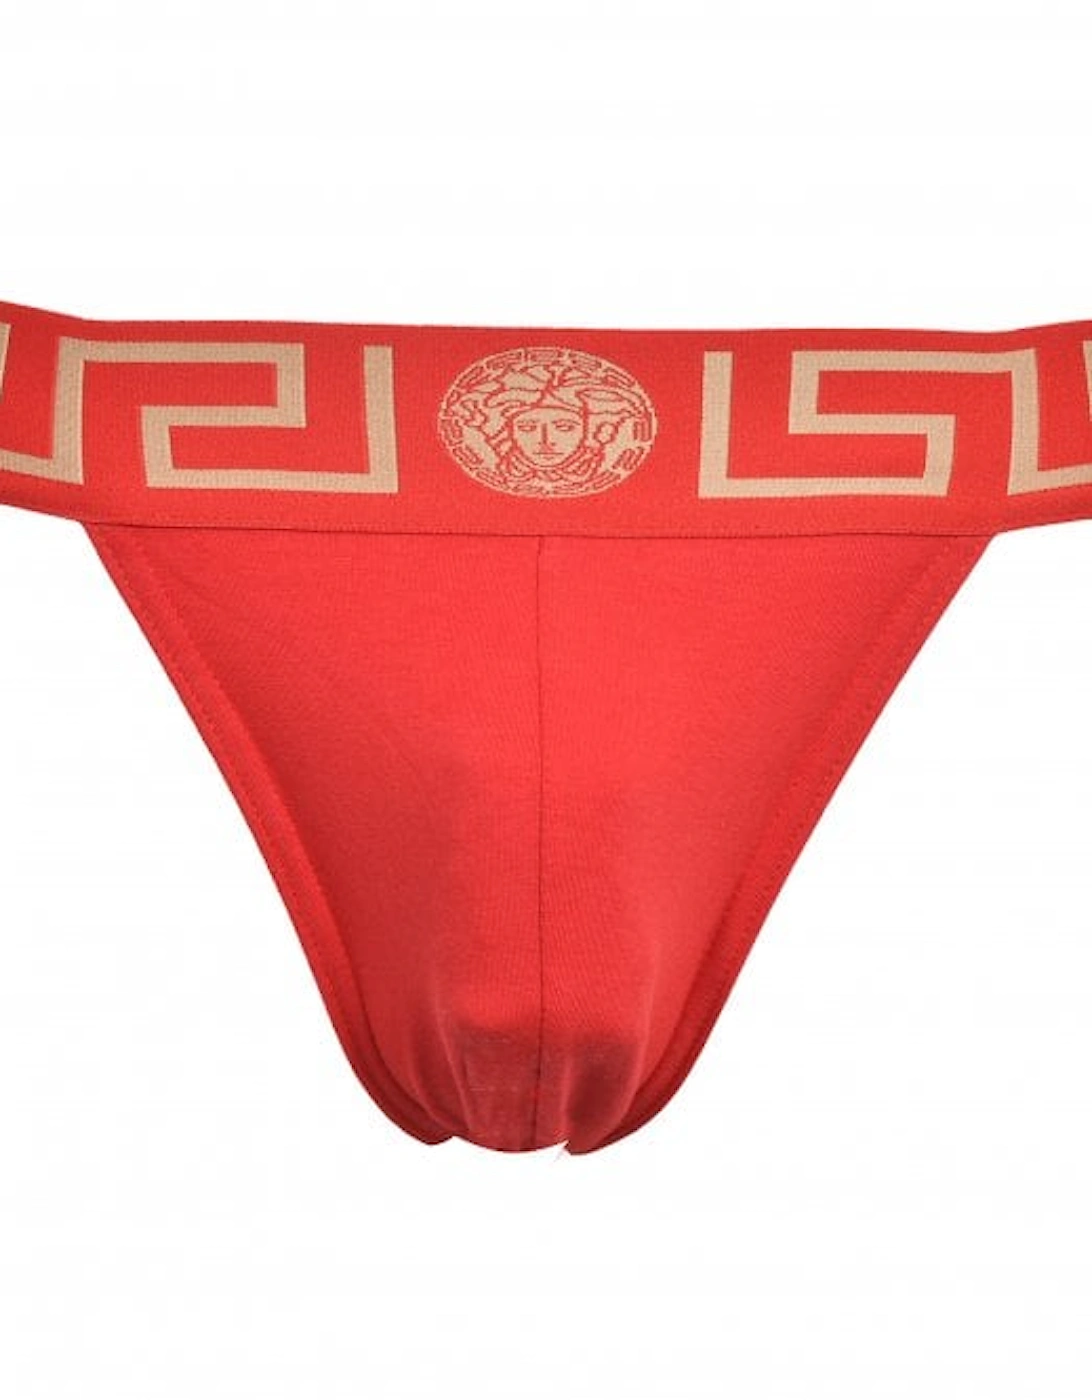 Iconic Jockstrap, Red/gold, 6 of 5